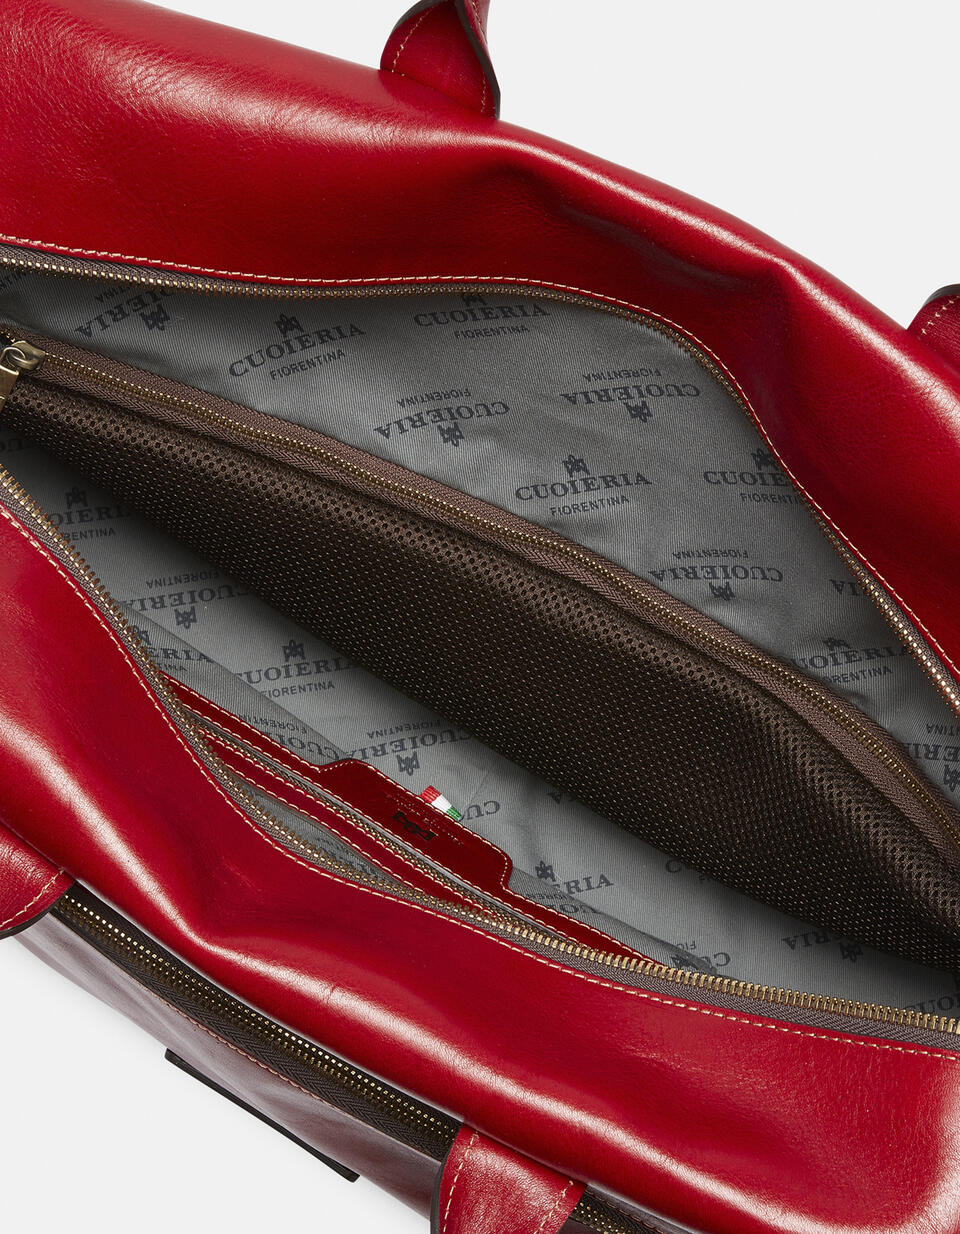 Tokyo small weekender bag - Luggage | TRAVEL BAGS ROSSO - Luggage | TRAVEL BAGSCuoieria Fiorentina